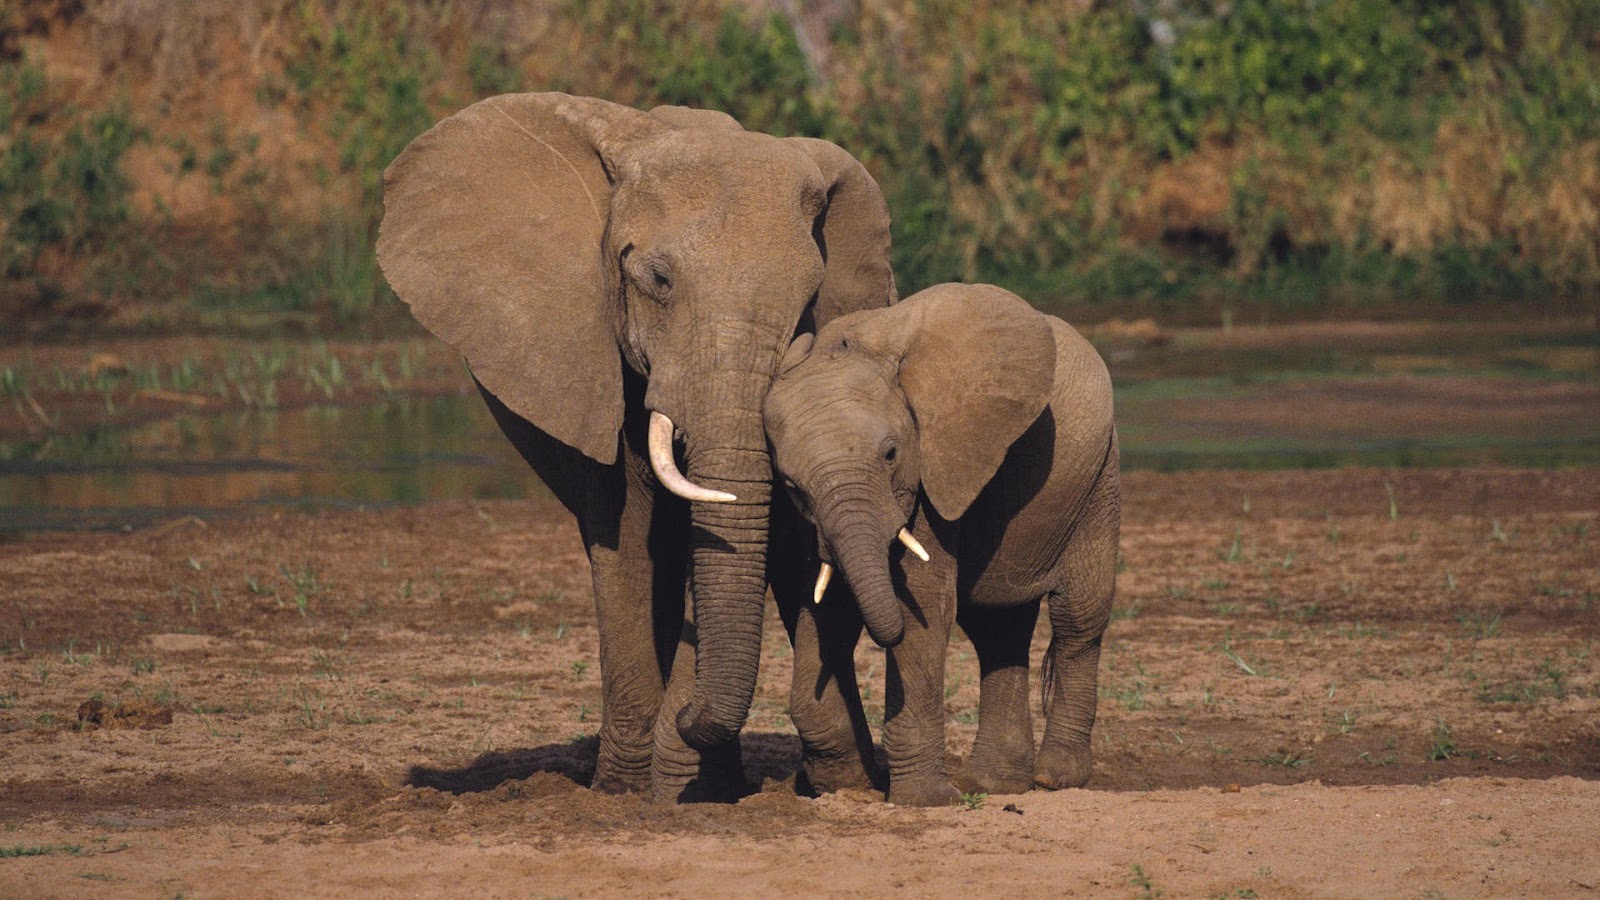 HD Elephants Wallpaper With A Mother And His Young Elephant